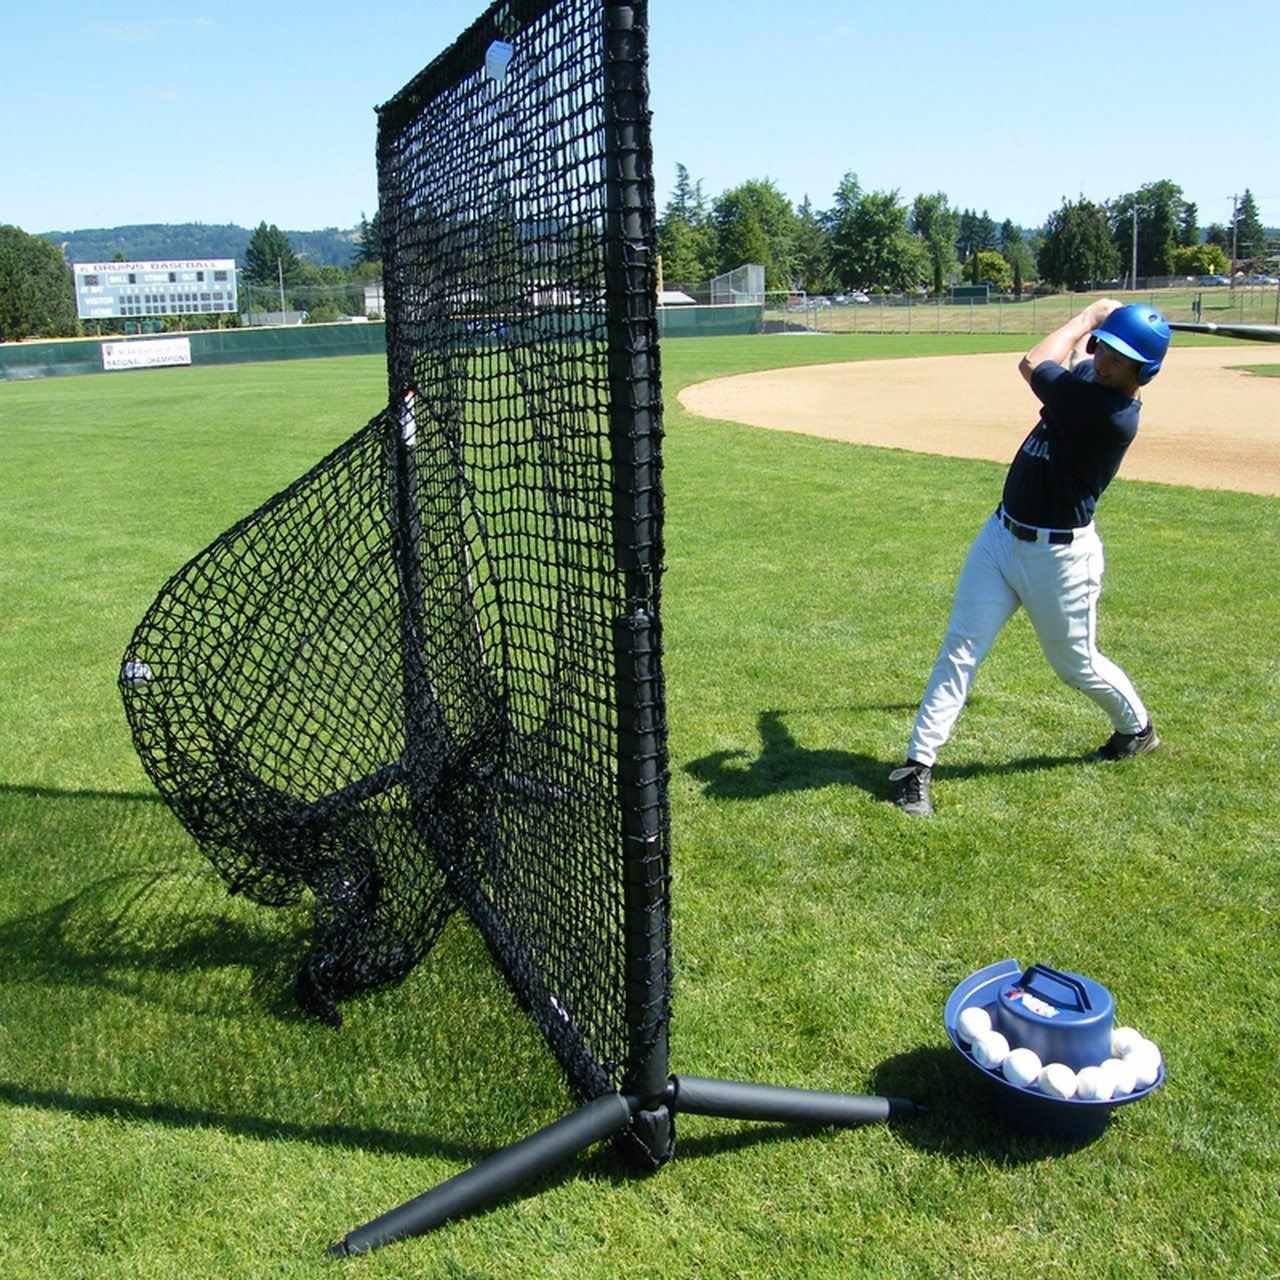 Jugs Toss Soft Toss Machine for Baseball with Hitting Station Outdoor Practice